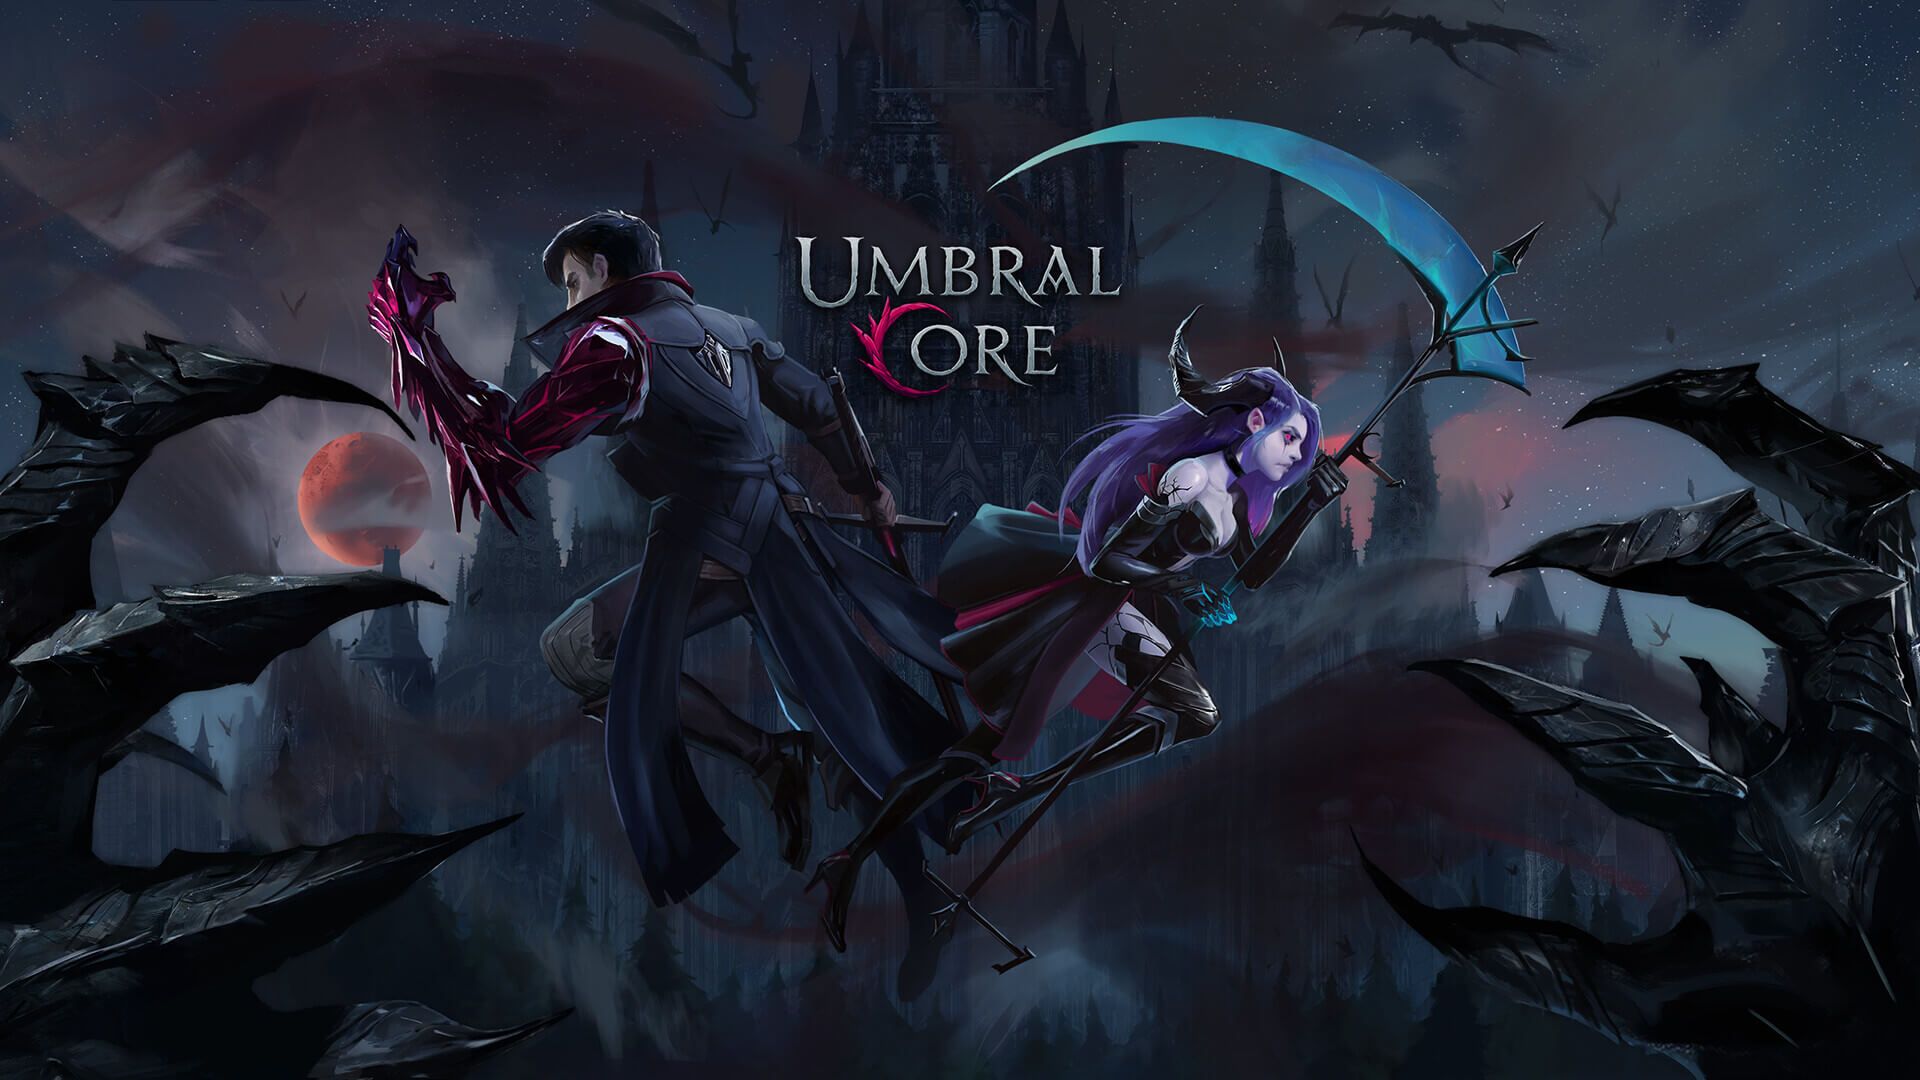 Umbral Core is Now Available For Crowdfunding on Kickstarter